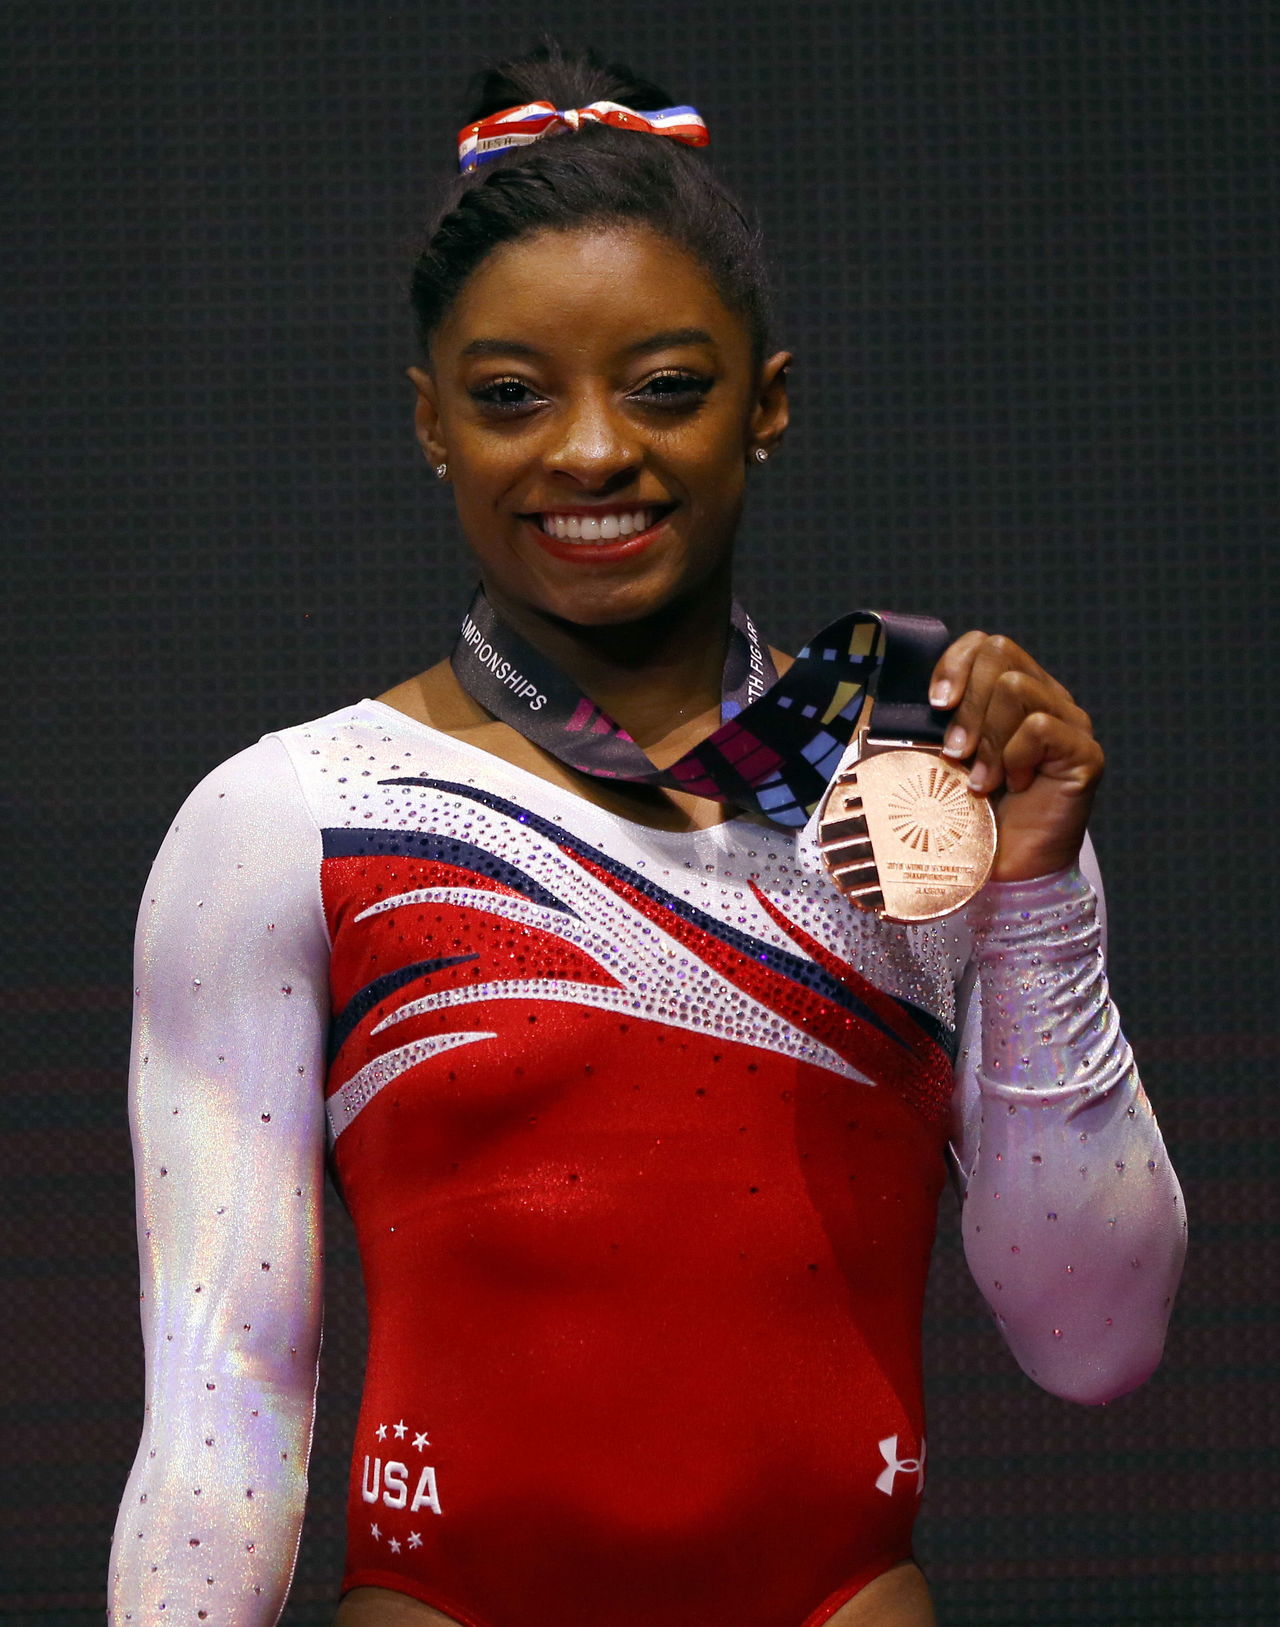 Simone Biles of the U.S. poses on the podium after the vault exercise at the World Artistic Gymnastics championships at the SSE Hydro Arena in Glasgow, Scotland on Oct. 31, 2015.